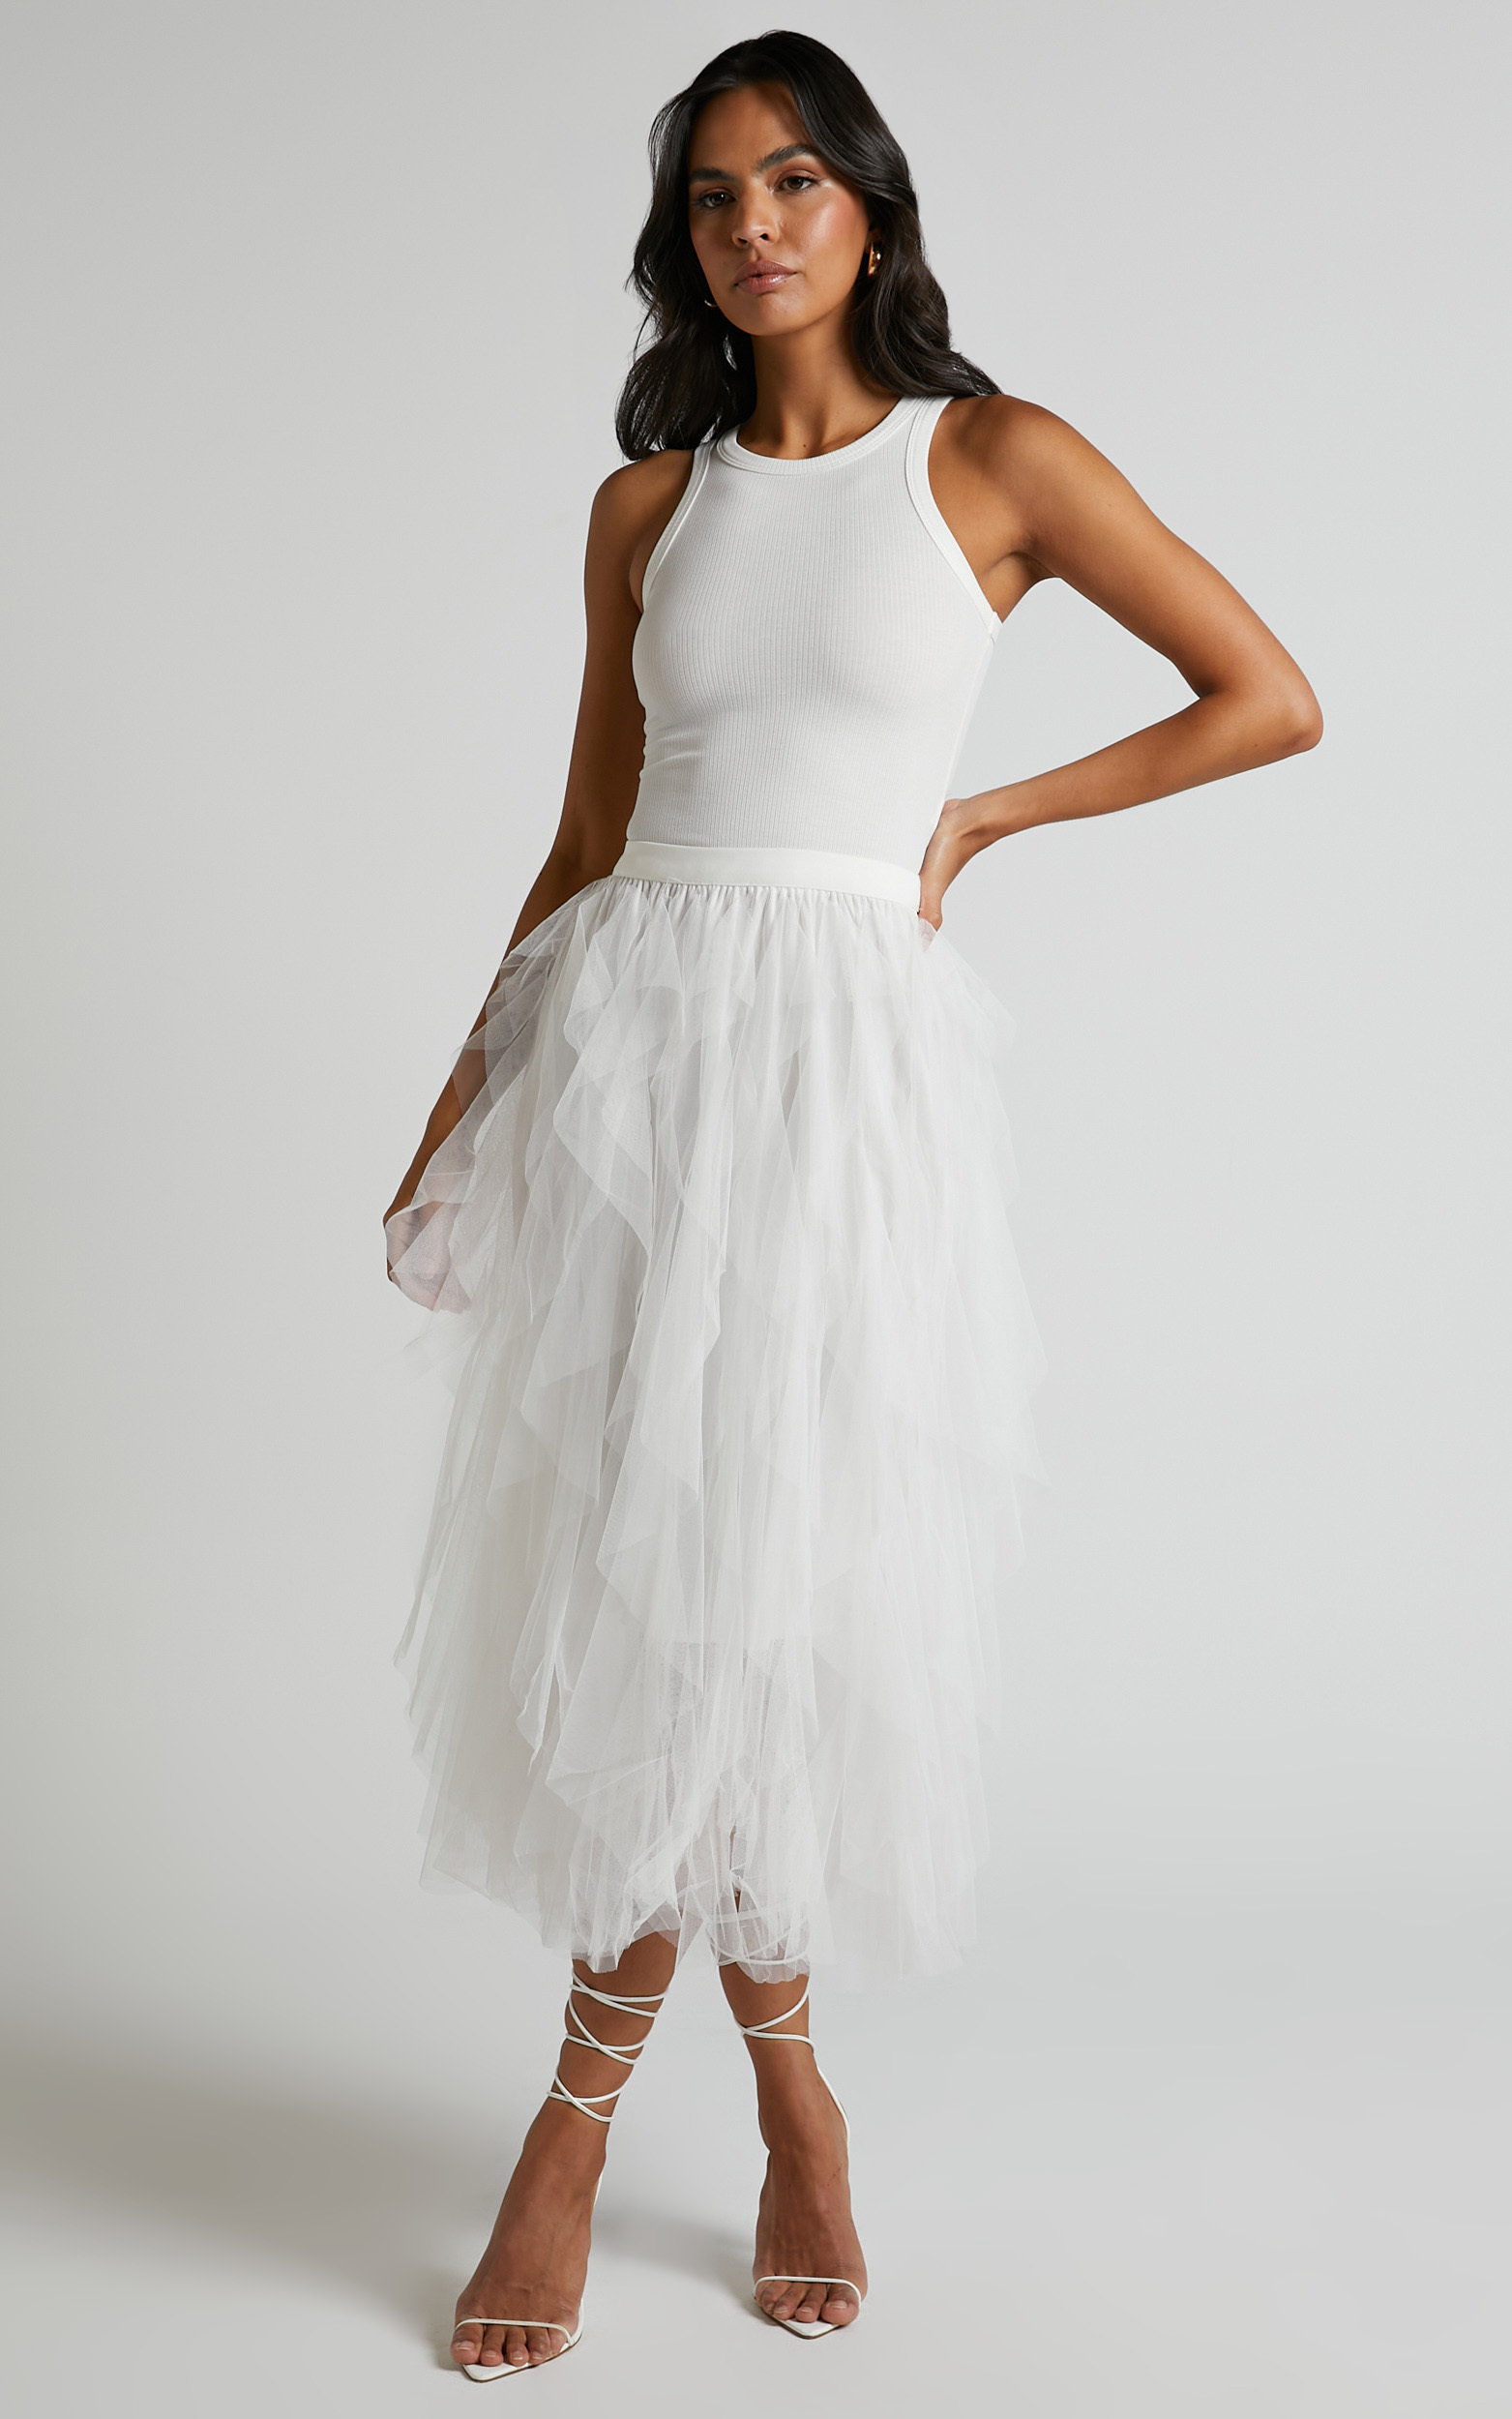 Out Of The Conversation Skirt In white - S/M, White, hi-res image number null